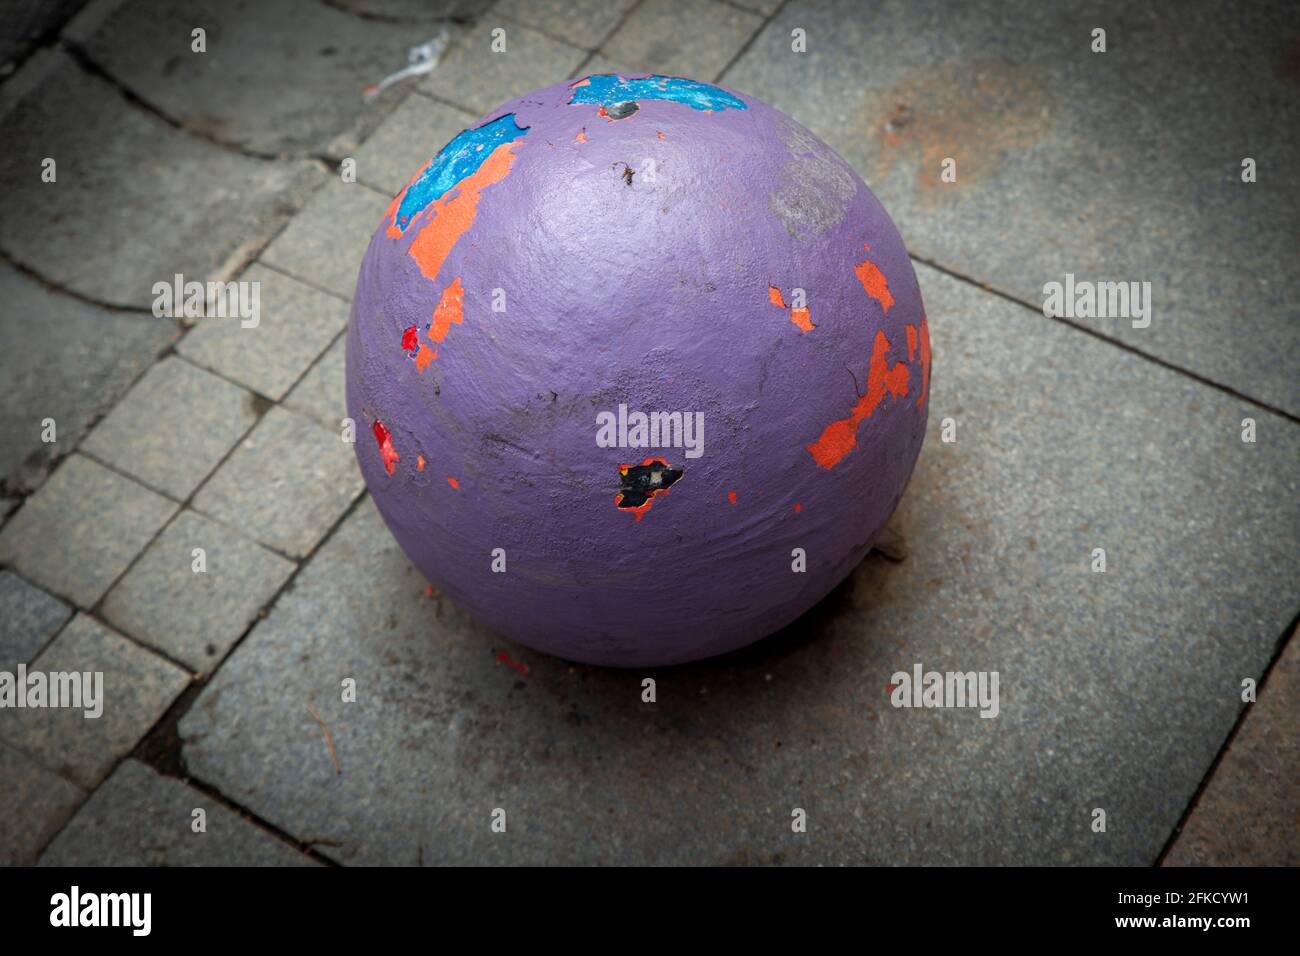 Close up high angle view image of a Colorful concrete ball on dull grey pavement, with worn out colorful layers of paint. Stock Photo